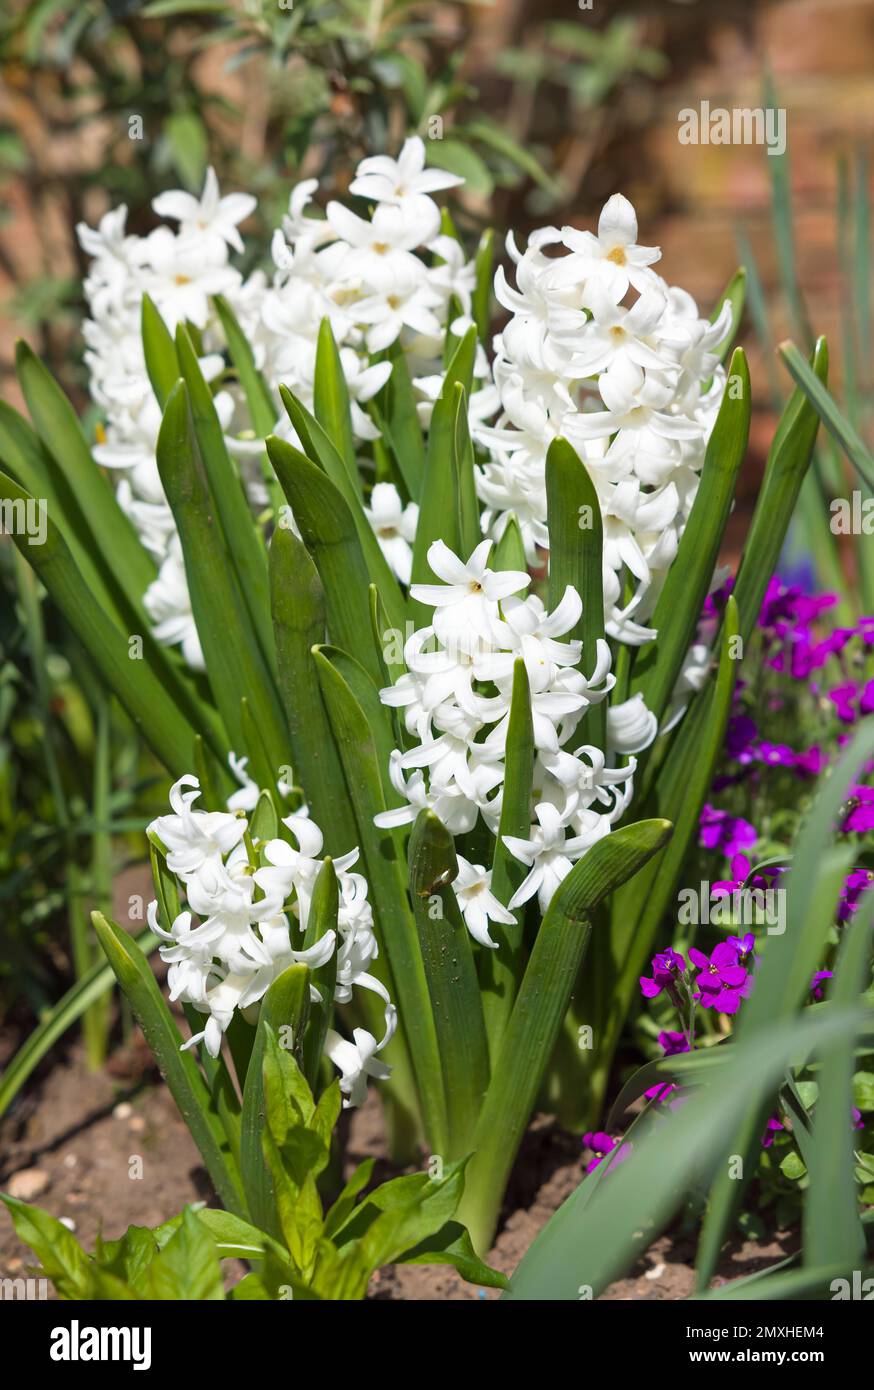 White hyacinth bulbs (Hyacinthus) growing in a flowerbed in an English garden in spring Stock Photo